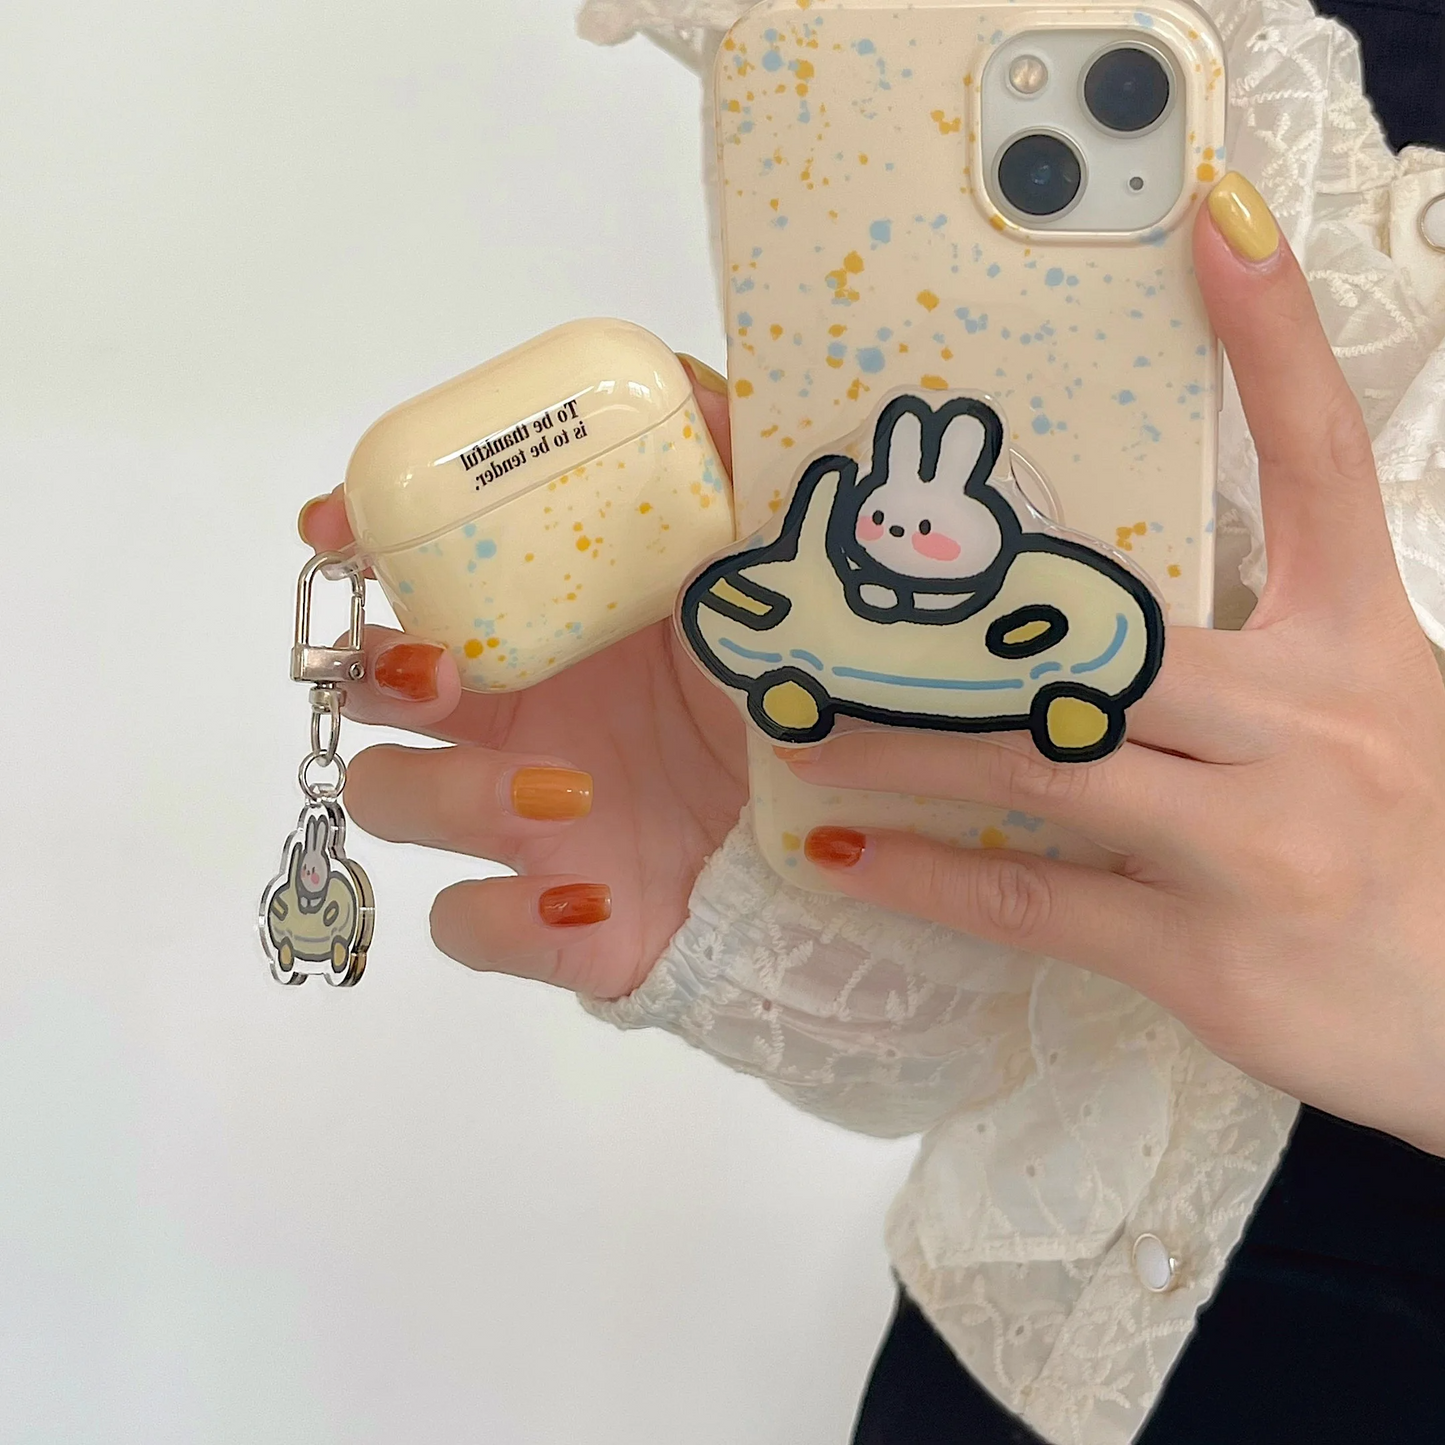 Road Trip Bear and Bunny AirPods Charger Case Cover (2 Designs)